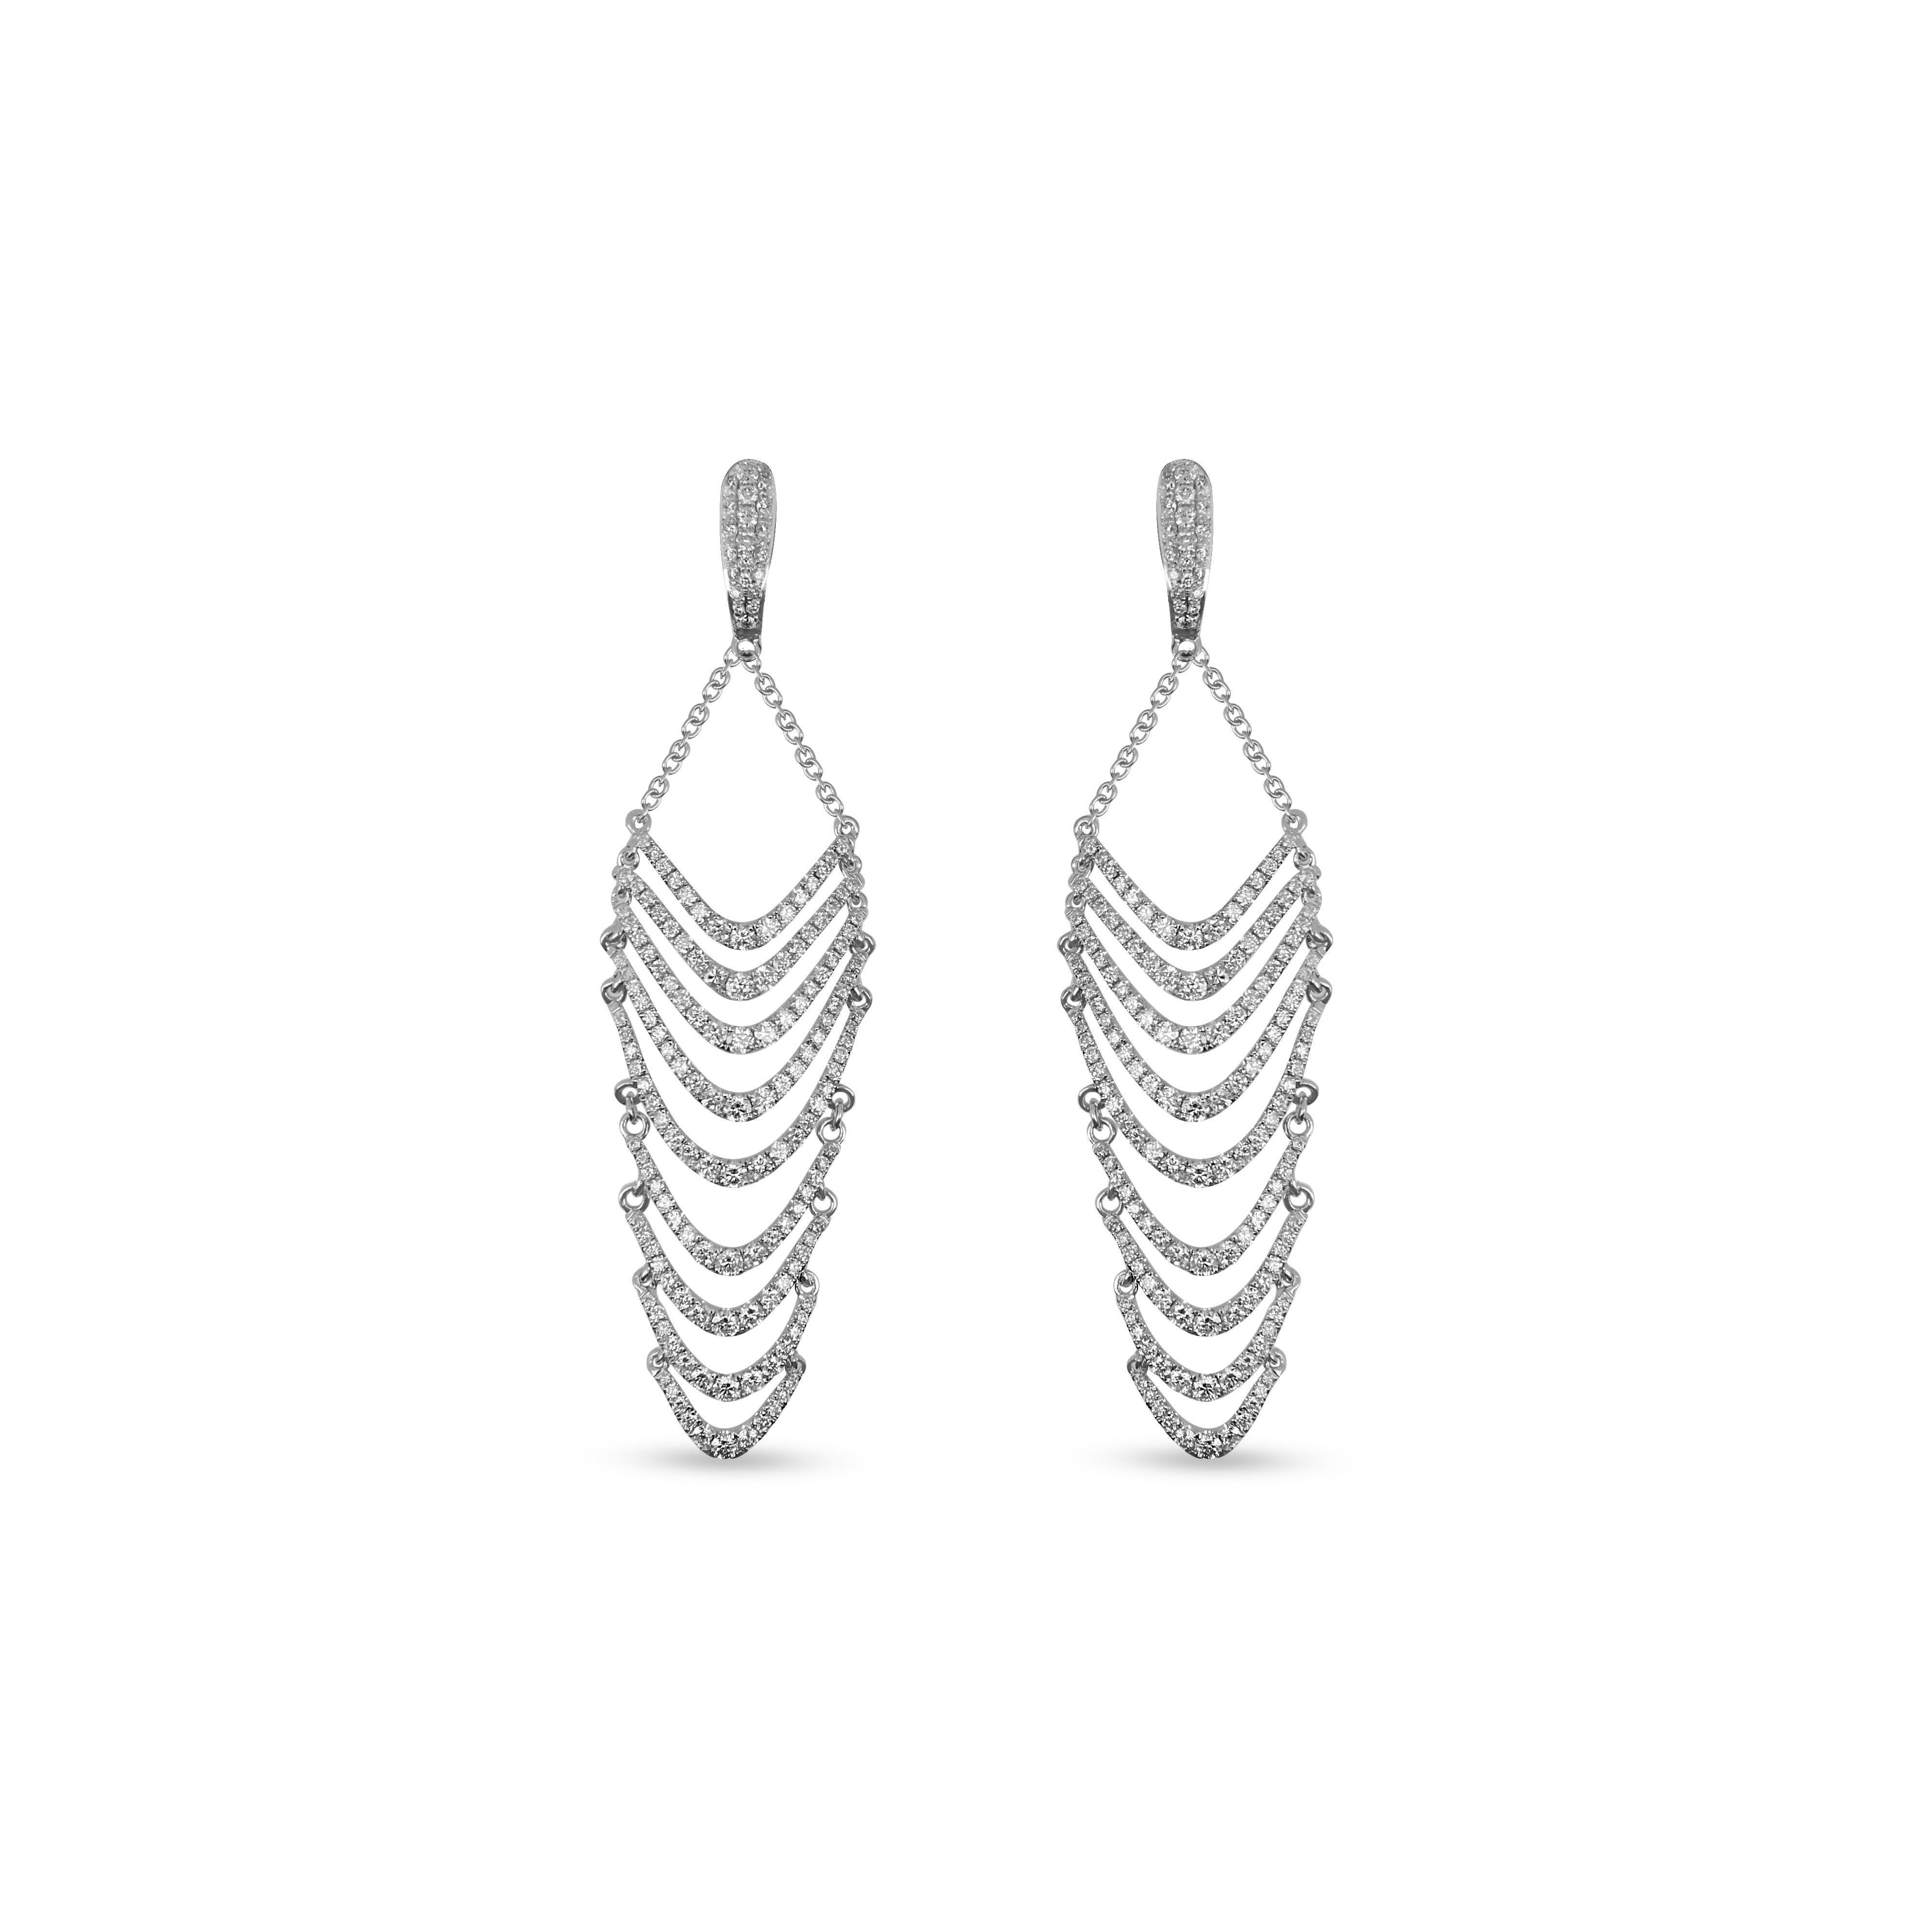 18k White Gold Dangling Earrings with Round Cut Diamonds  In New Condition For Sale In Abu Dhabi, Abu Dhabi